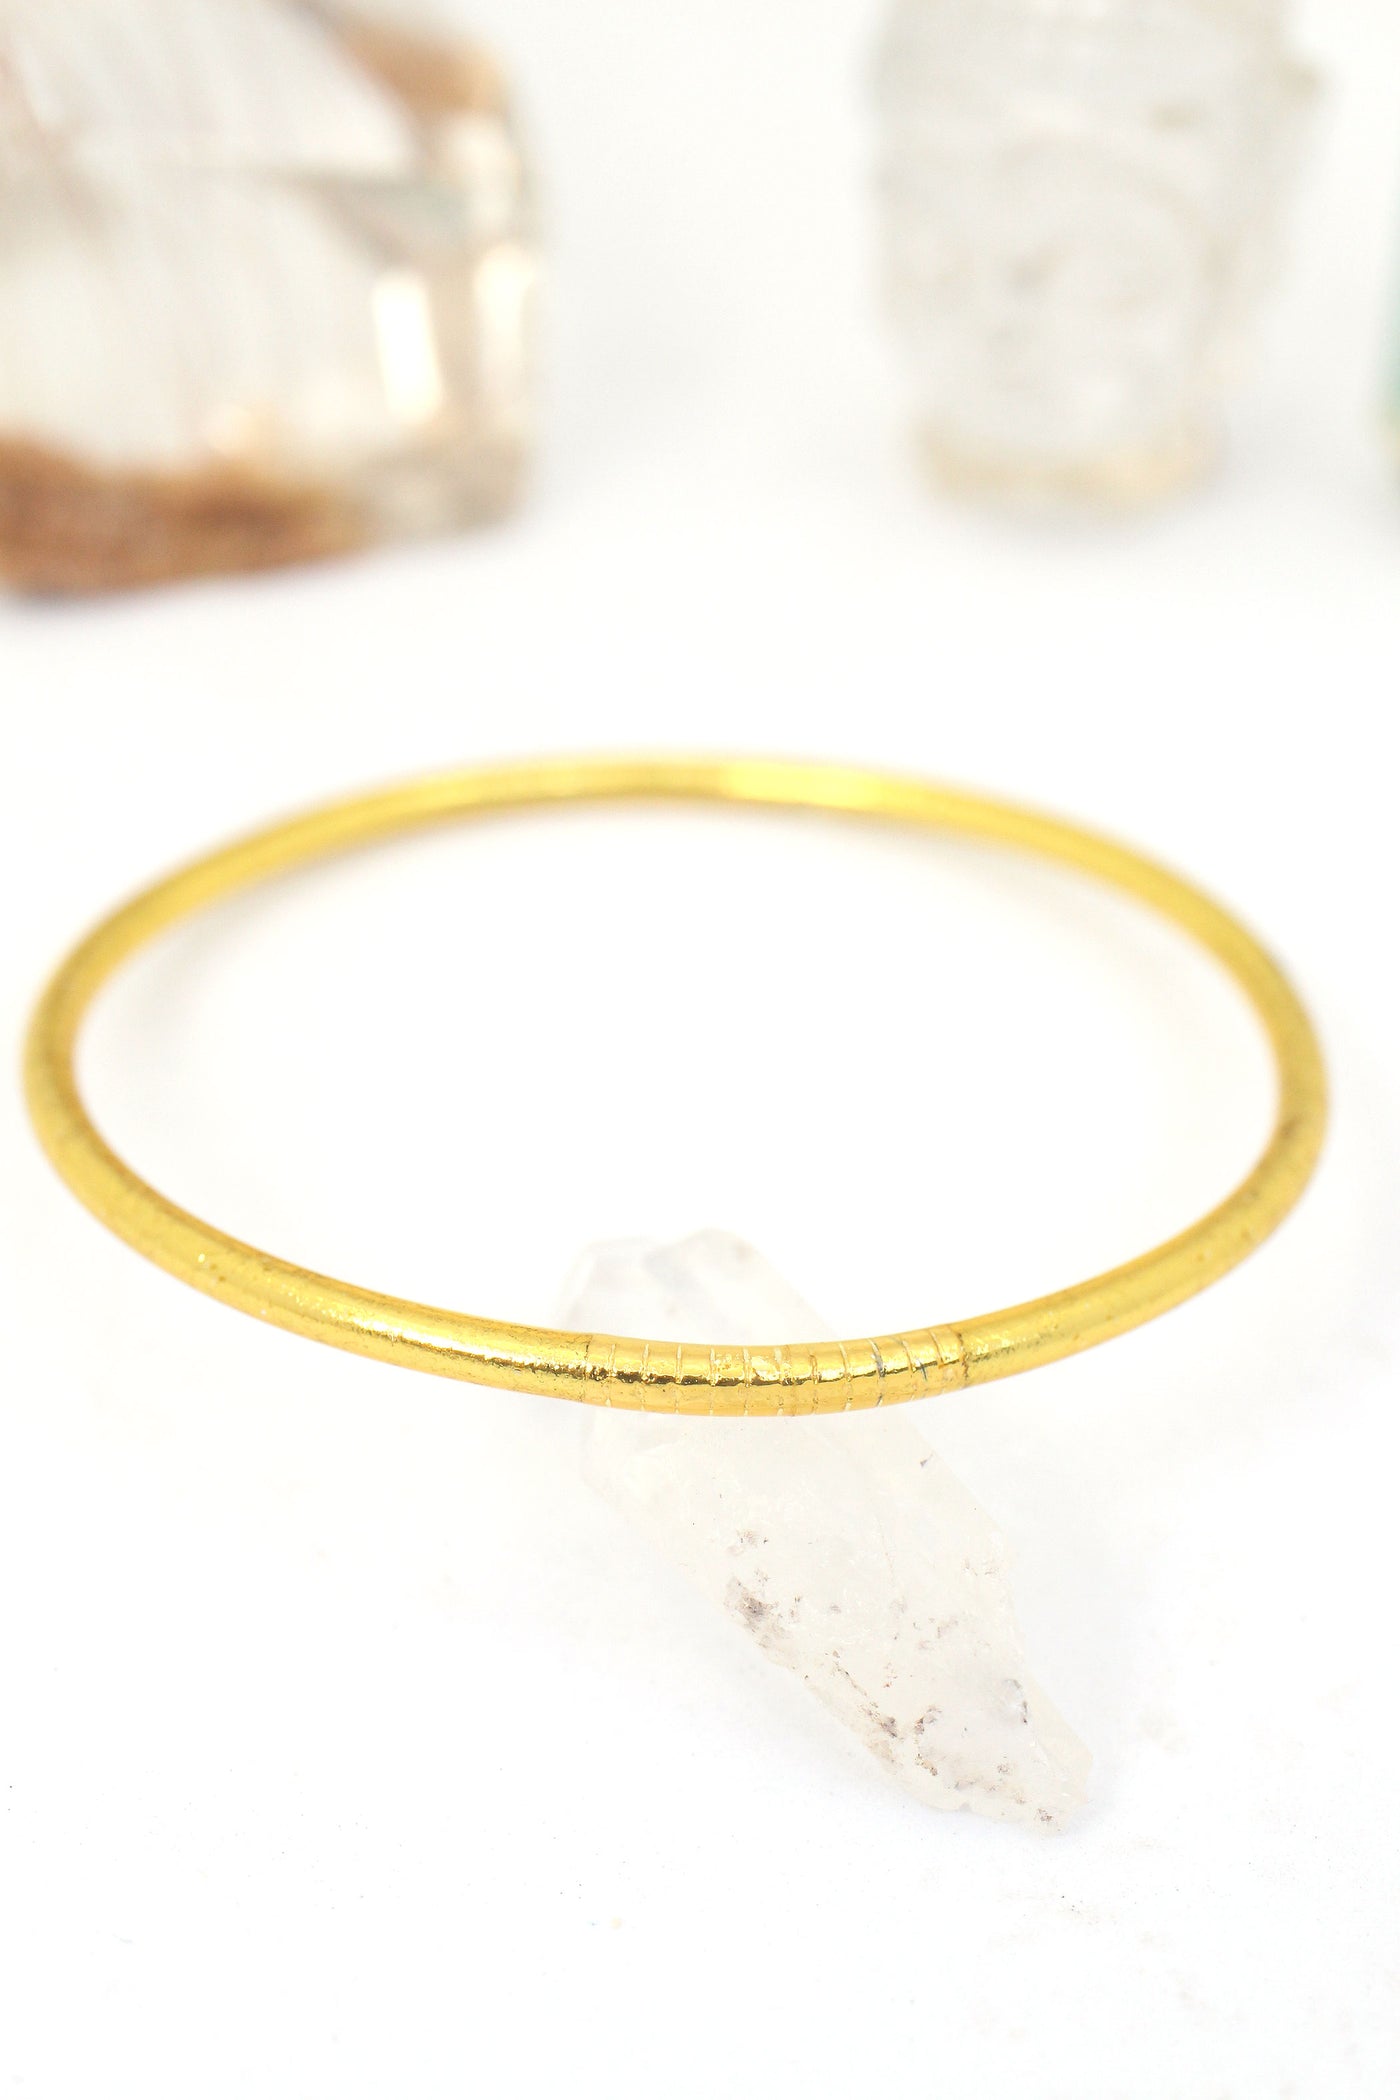 Gold Temple Bracelet, Mantra Bangle from Thailand, Blessed by Monk, Good Luck Bracelet